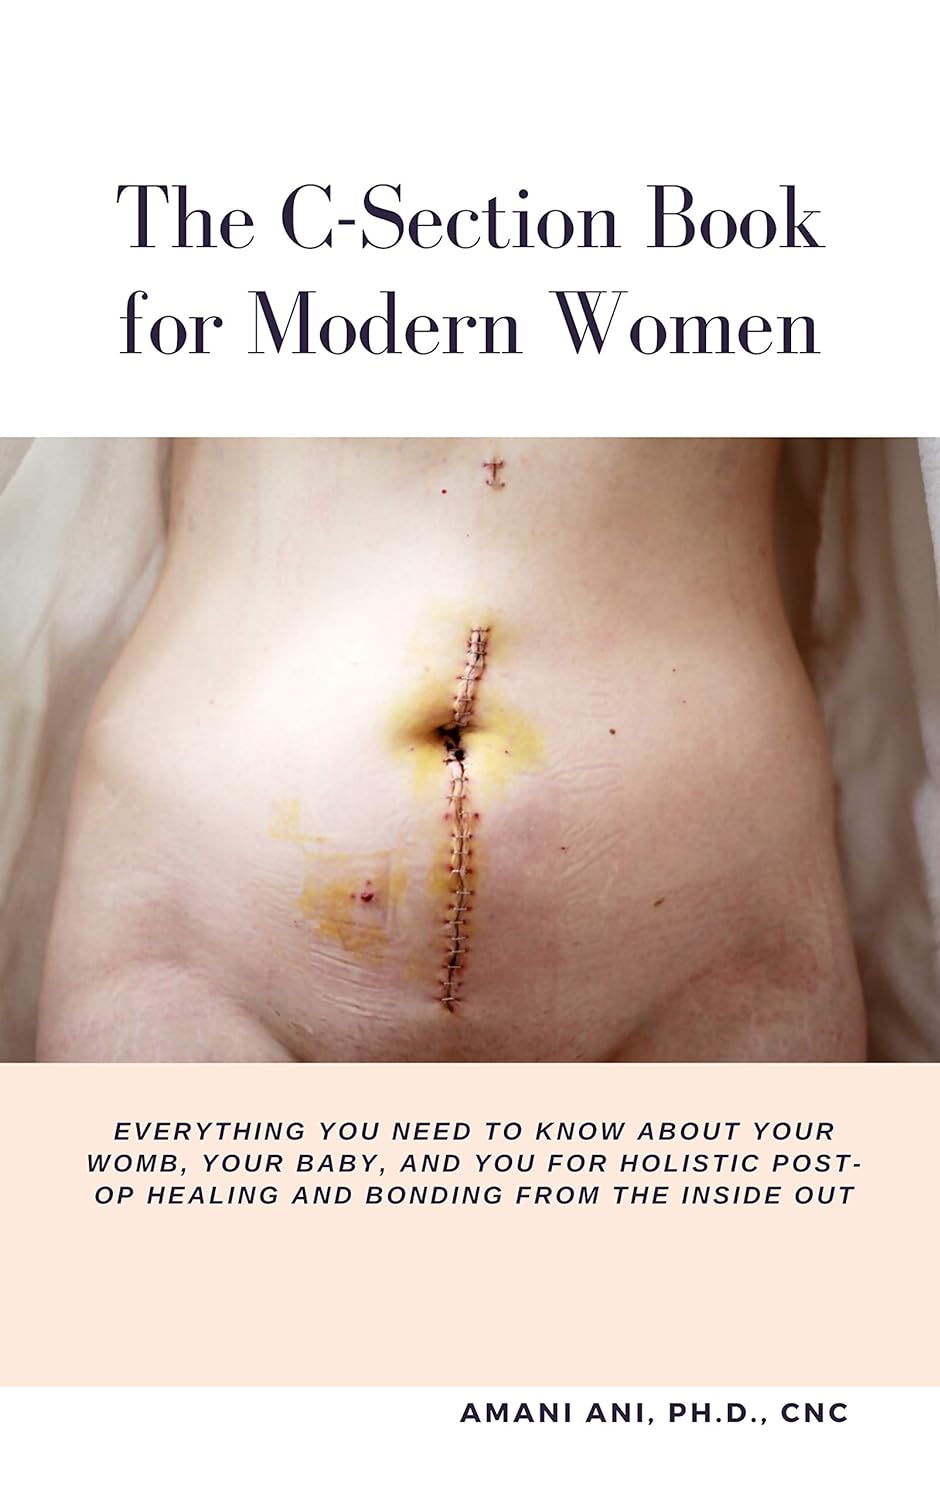 The C-Section Book for Modern Women